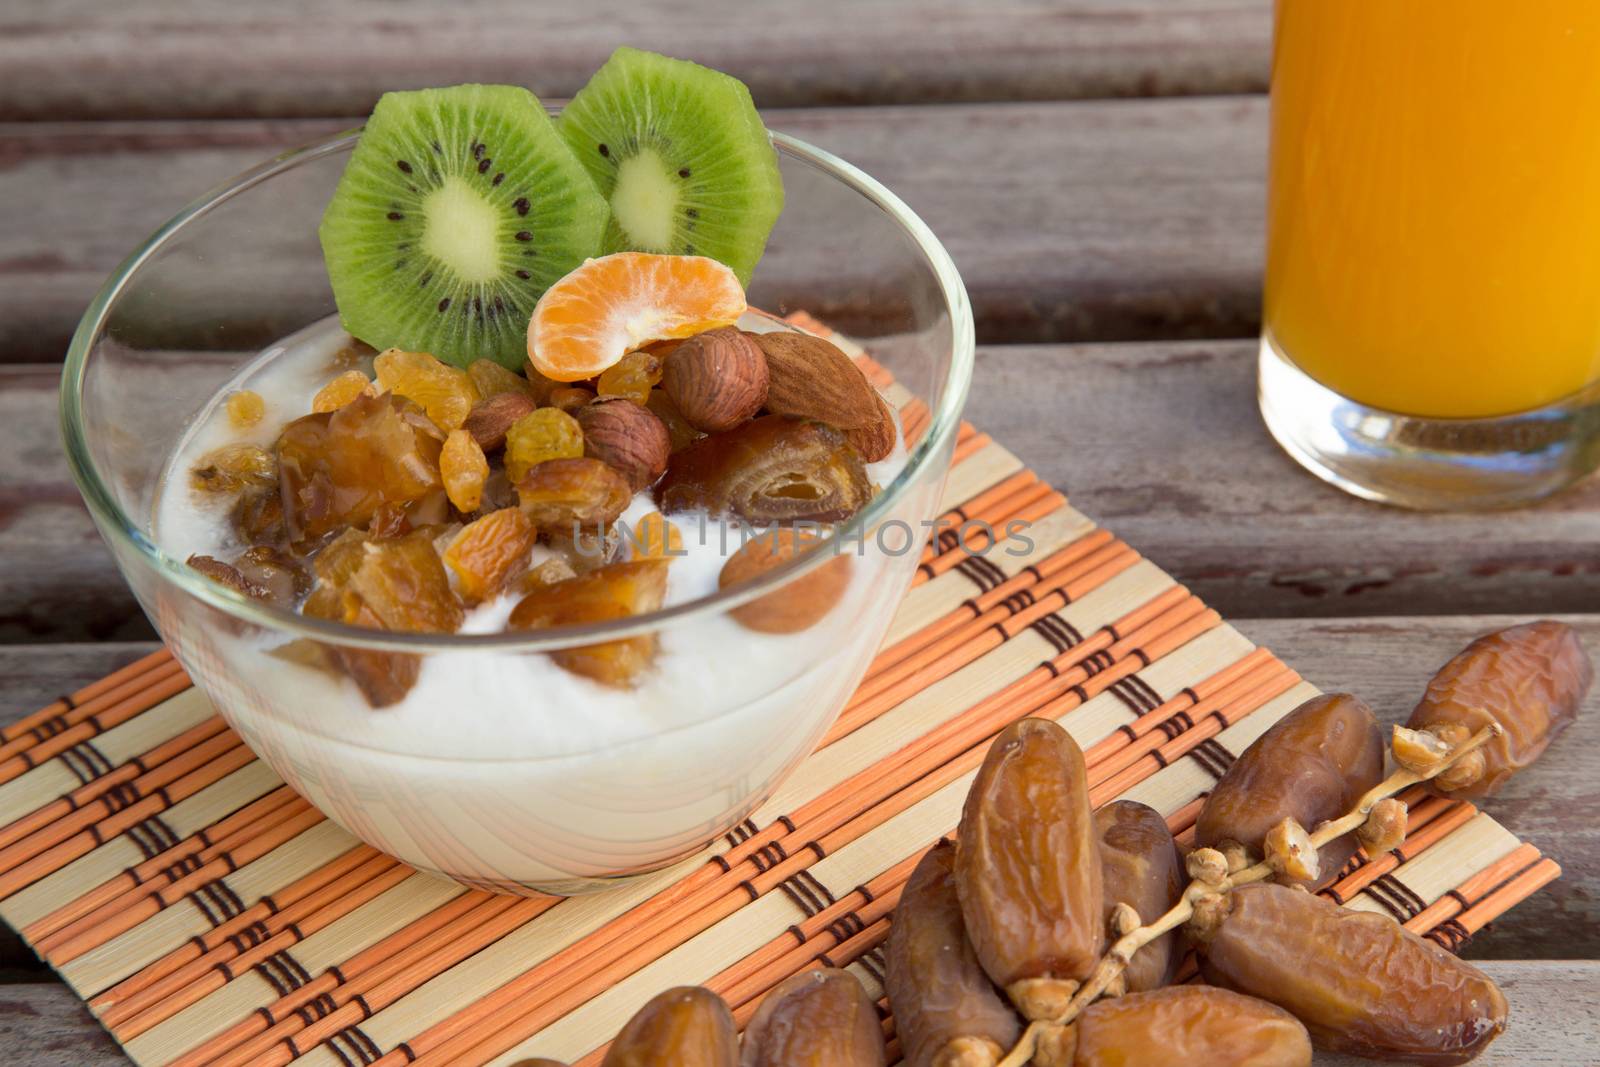 Healthy breakfast - natural yogurt with dried fruits and a glass of orange juice